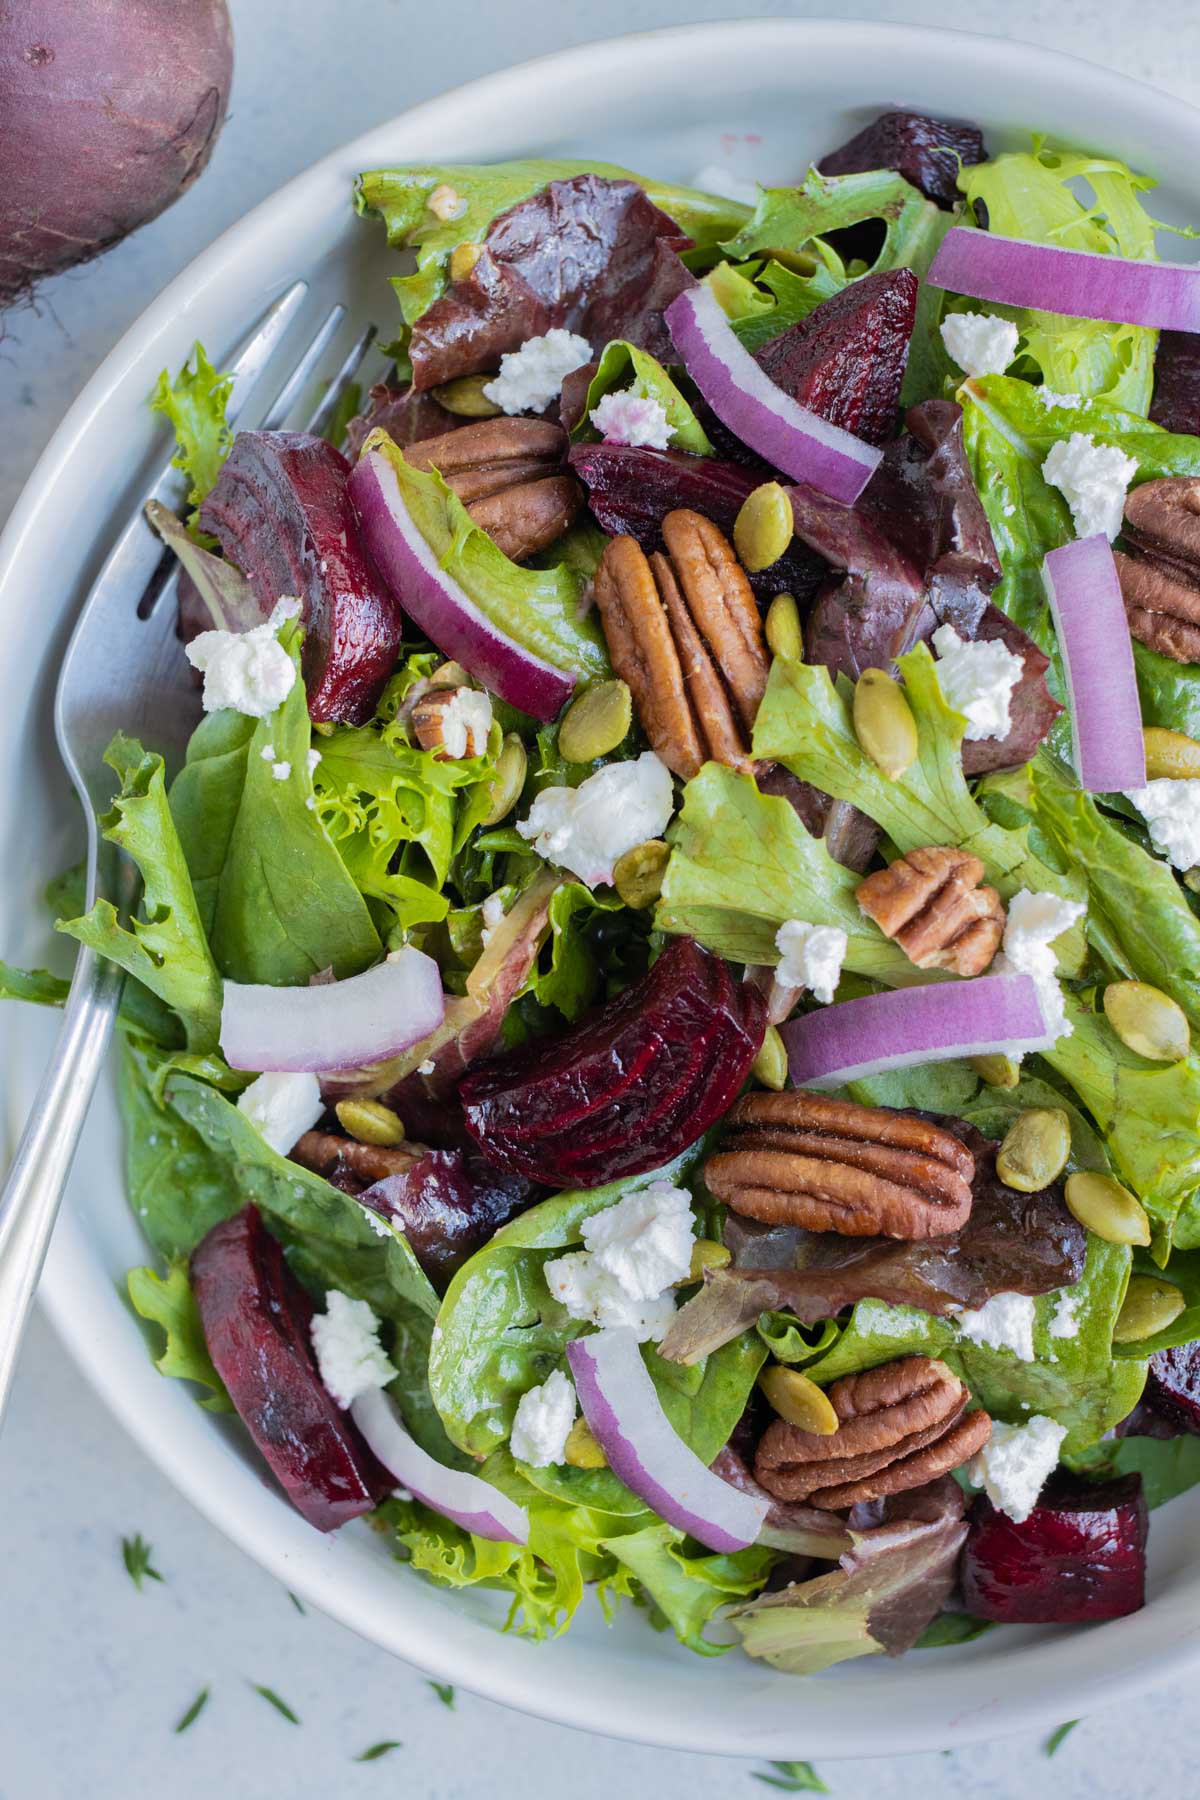 This fall salad is an easy dish served from a bowl.